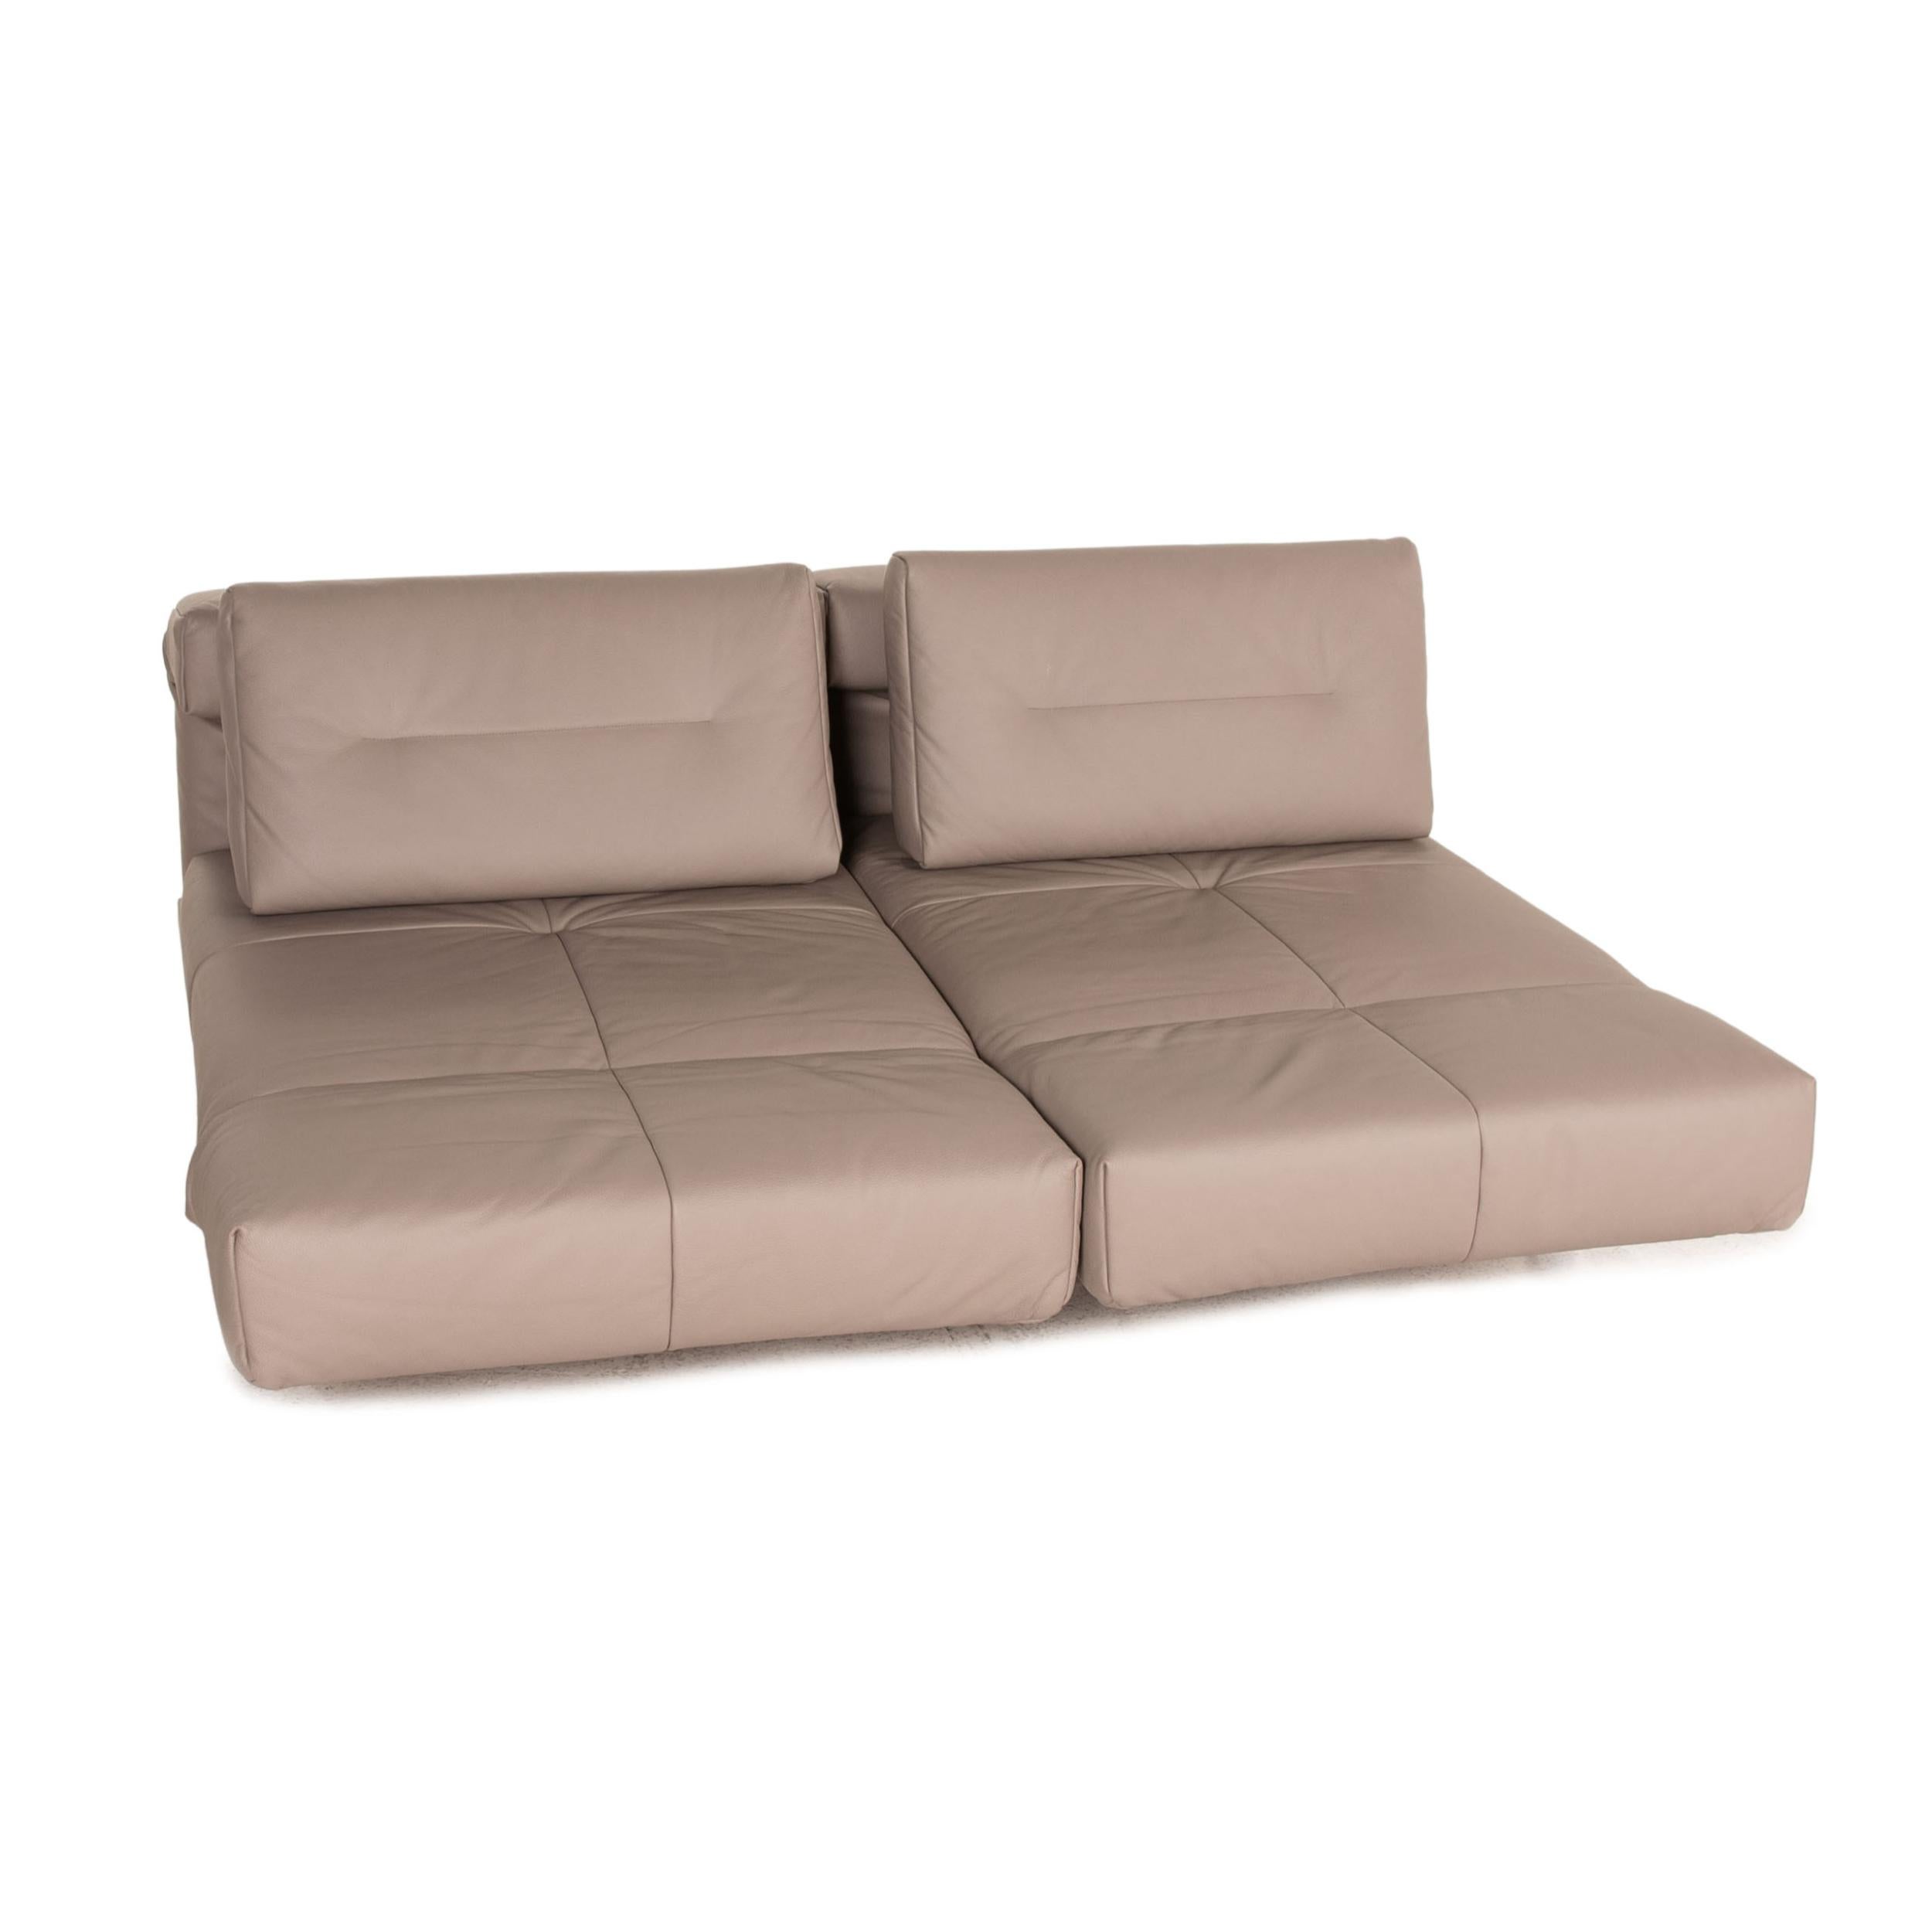 Leather Franz Fertig Letto leather sofa beige two-seater function sleeping function For Sale